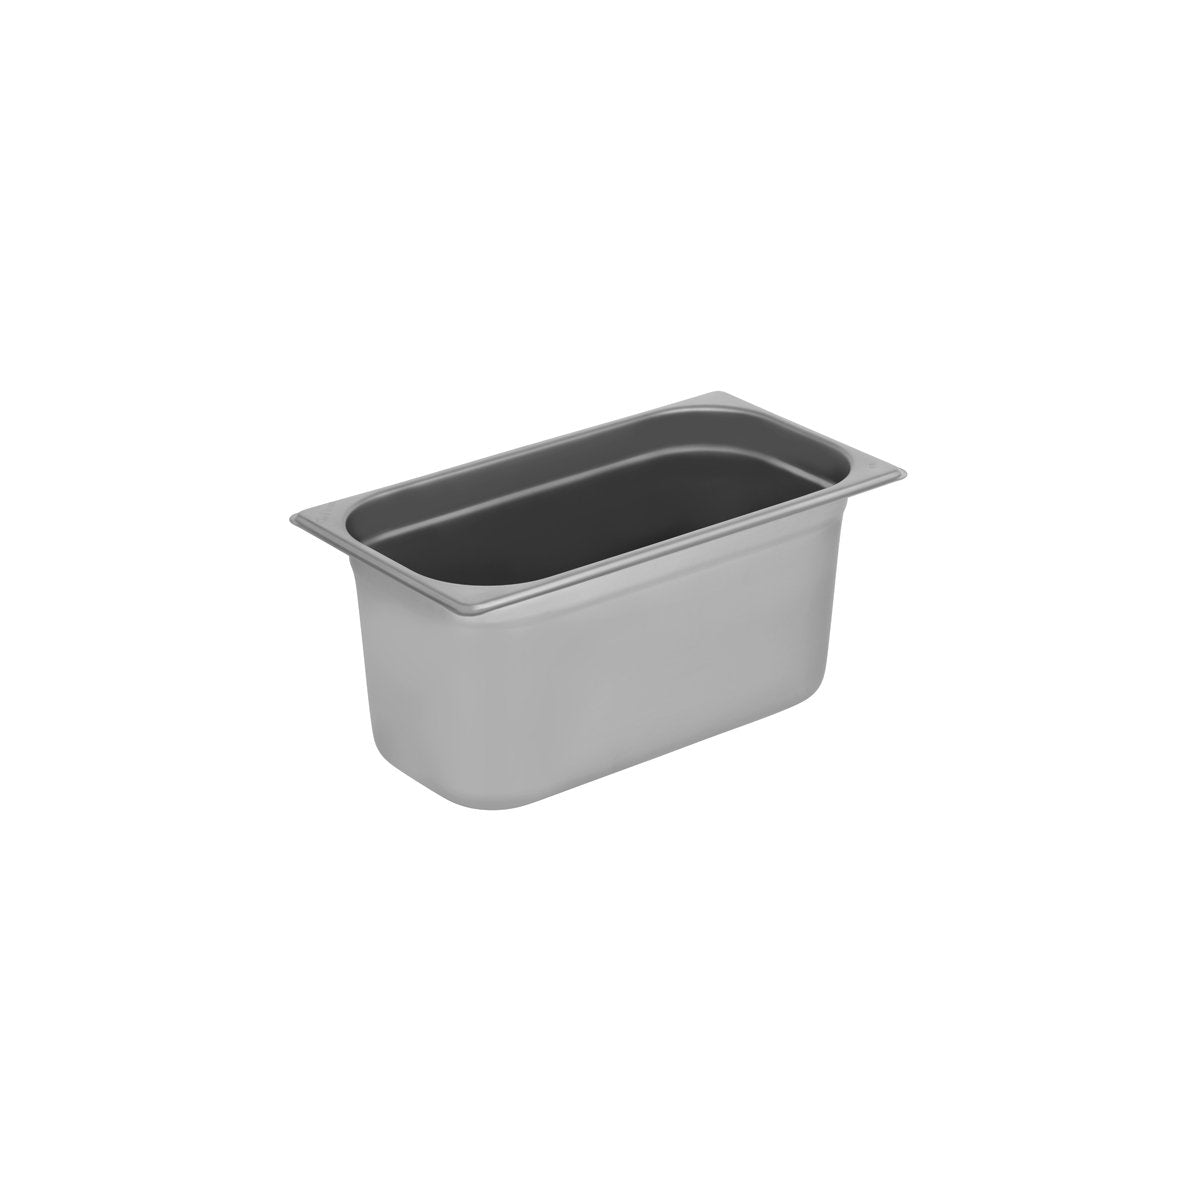 GN-13150 Chef Inox Gastronorm Pan 1/3 Size 150mm Tomkin Australia Hospitality Supplies